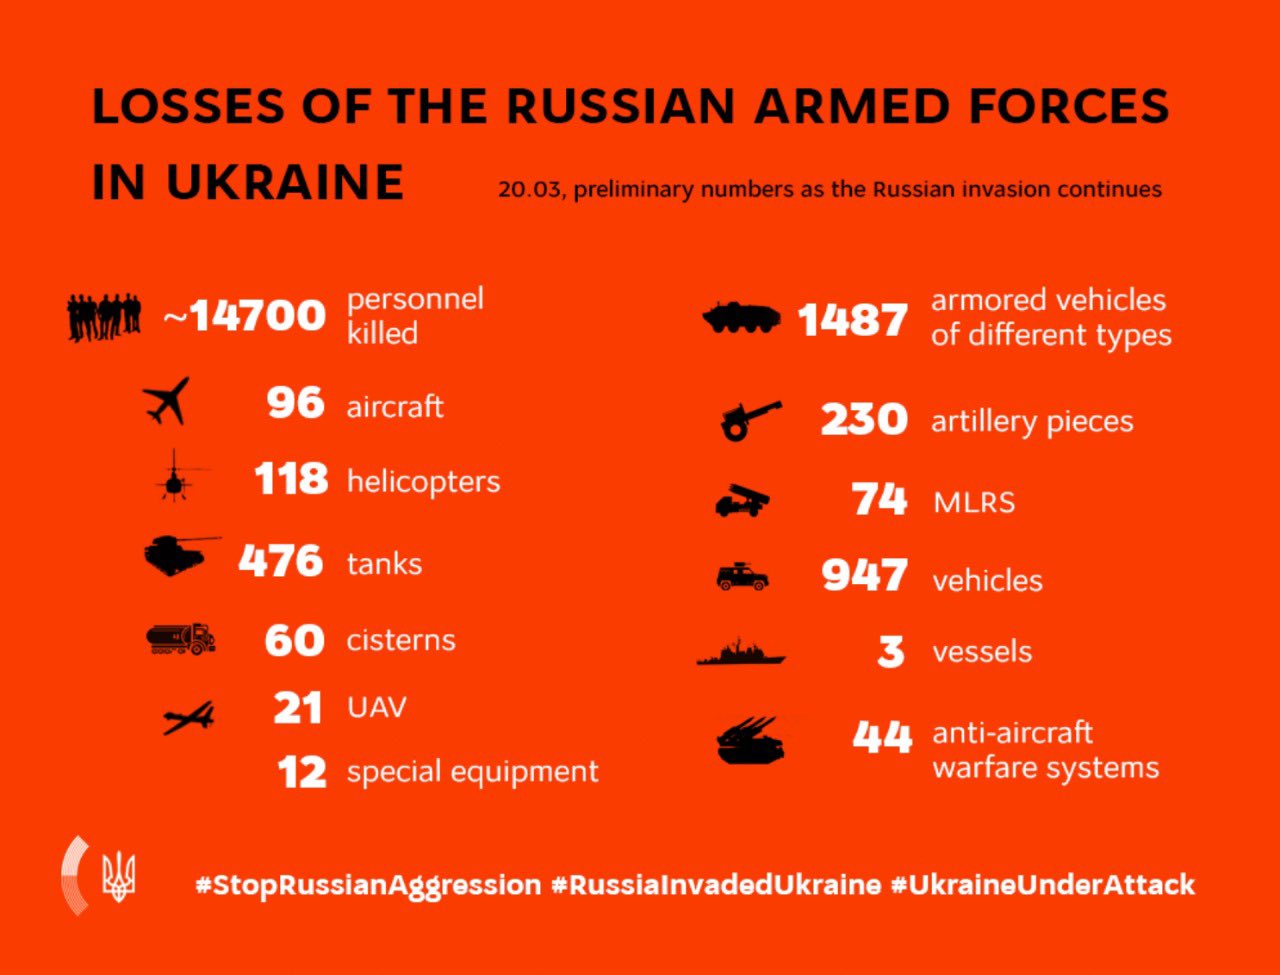 Over 14000 Russian personnel killed, 476 tanks destroyed: Ukraine